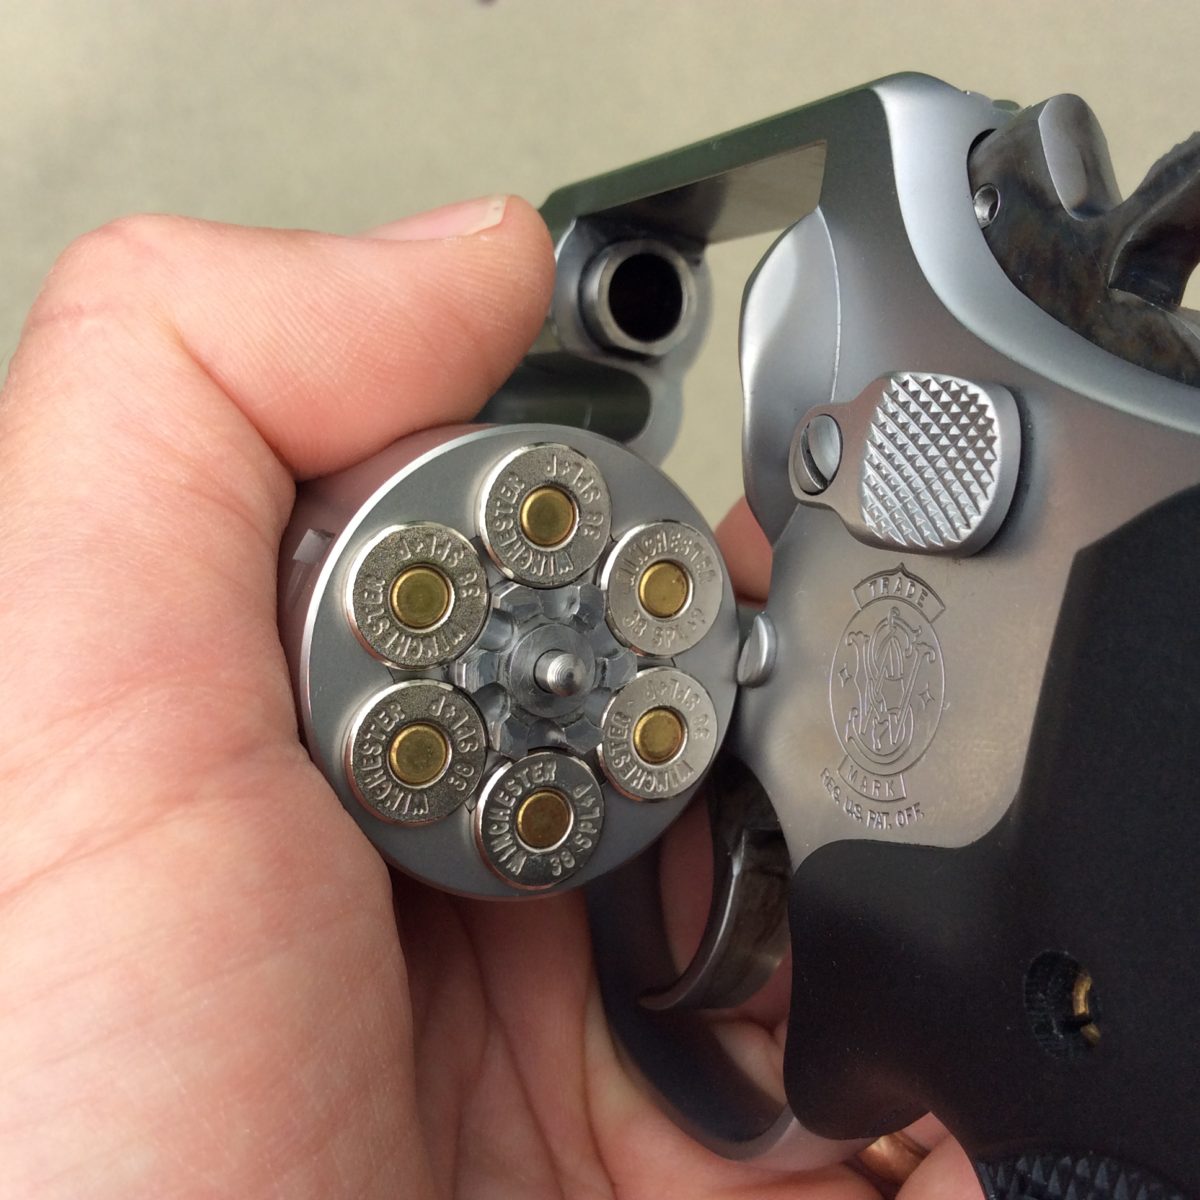 How To Safely Unload a Double Action Revolver